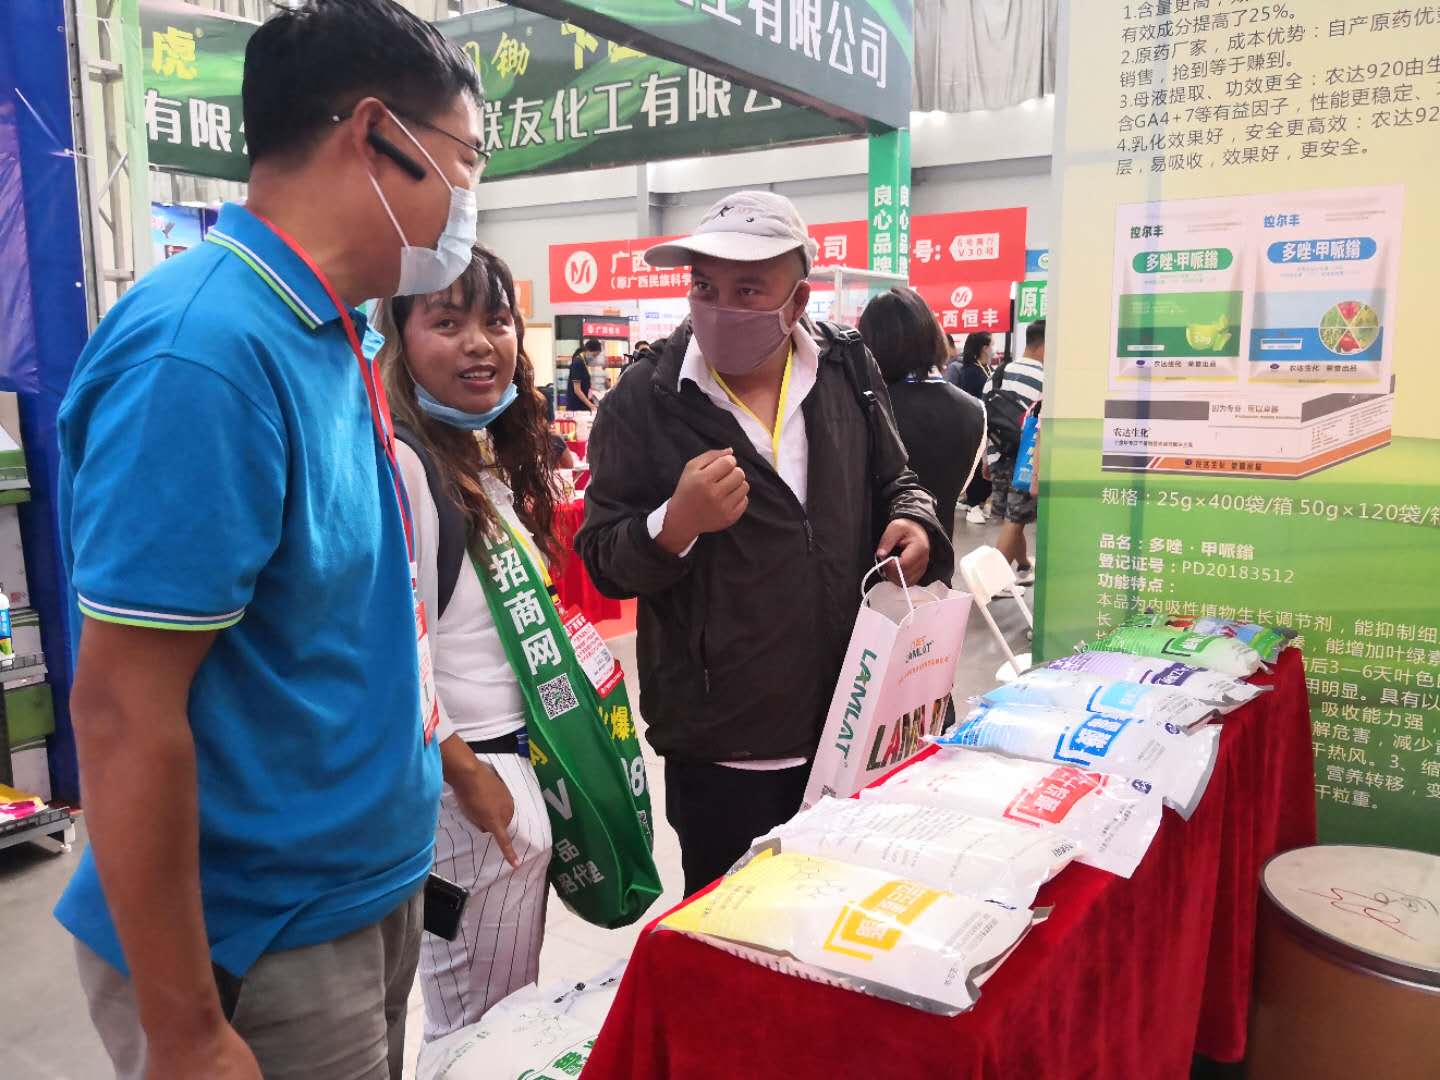 Our company participated in the 17th Southwest Agricultural Materials Expo(图1)